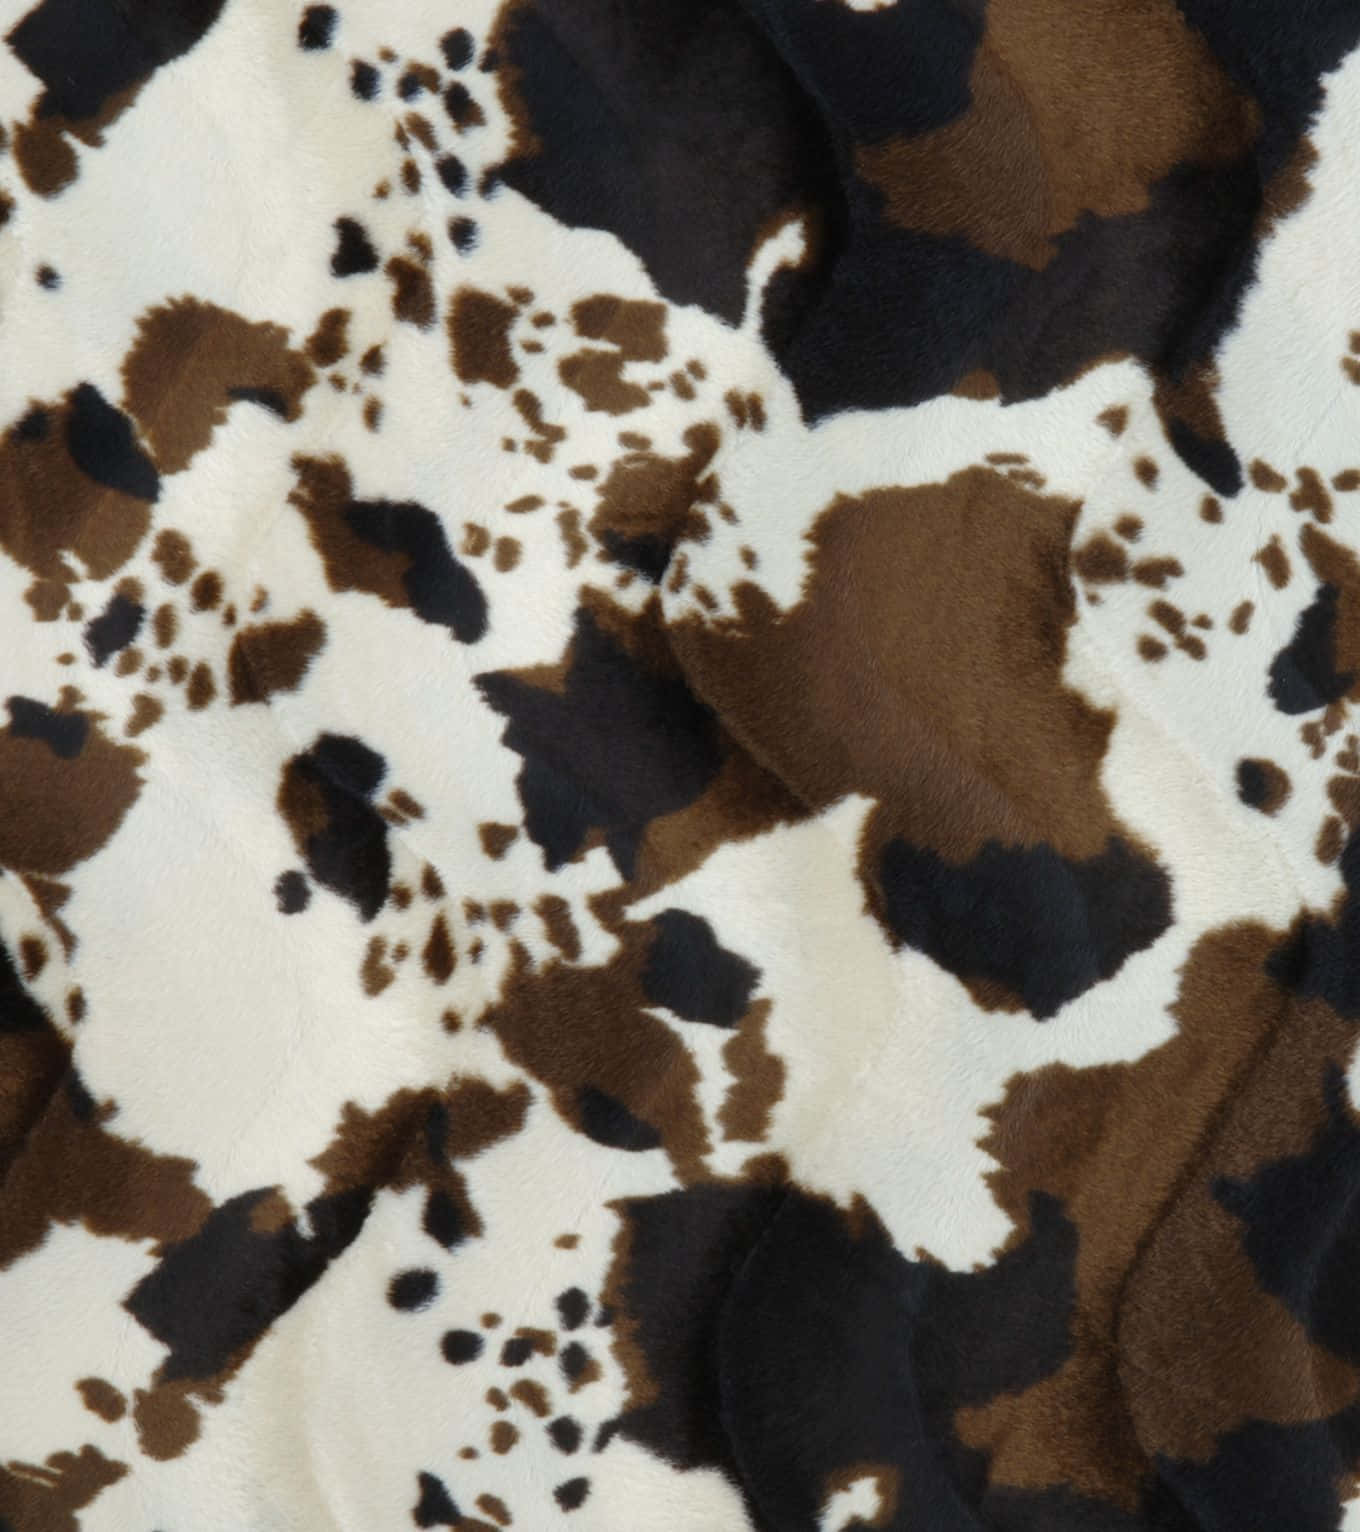 43528 Cowhide Background Images Stock Photos  Vectors  Shutterstock